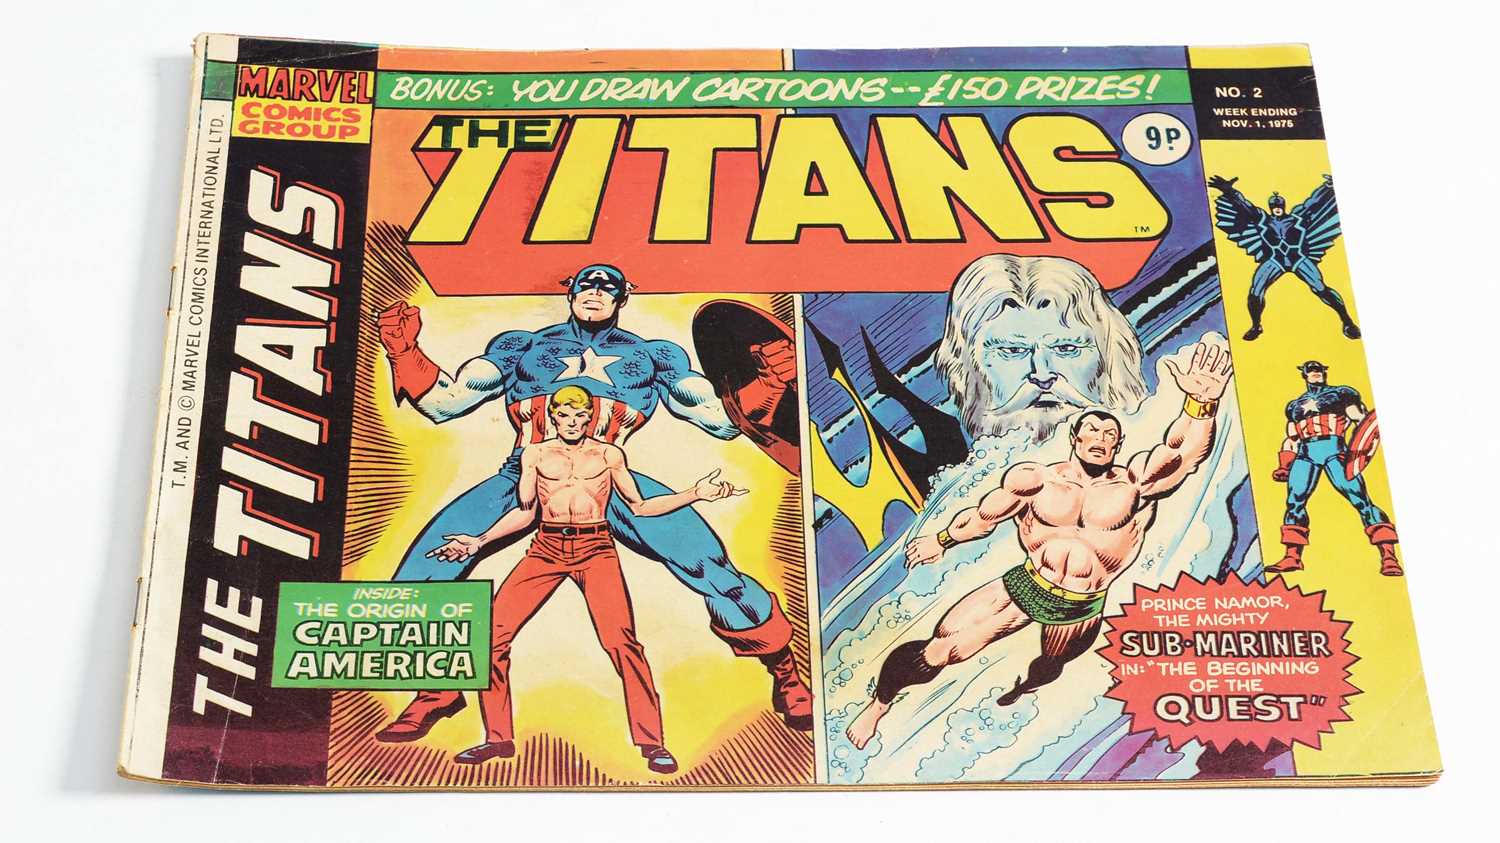 The Titans by British Marvel comics - Image 2 of 13